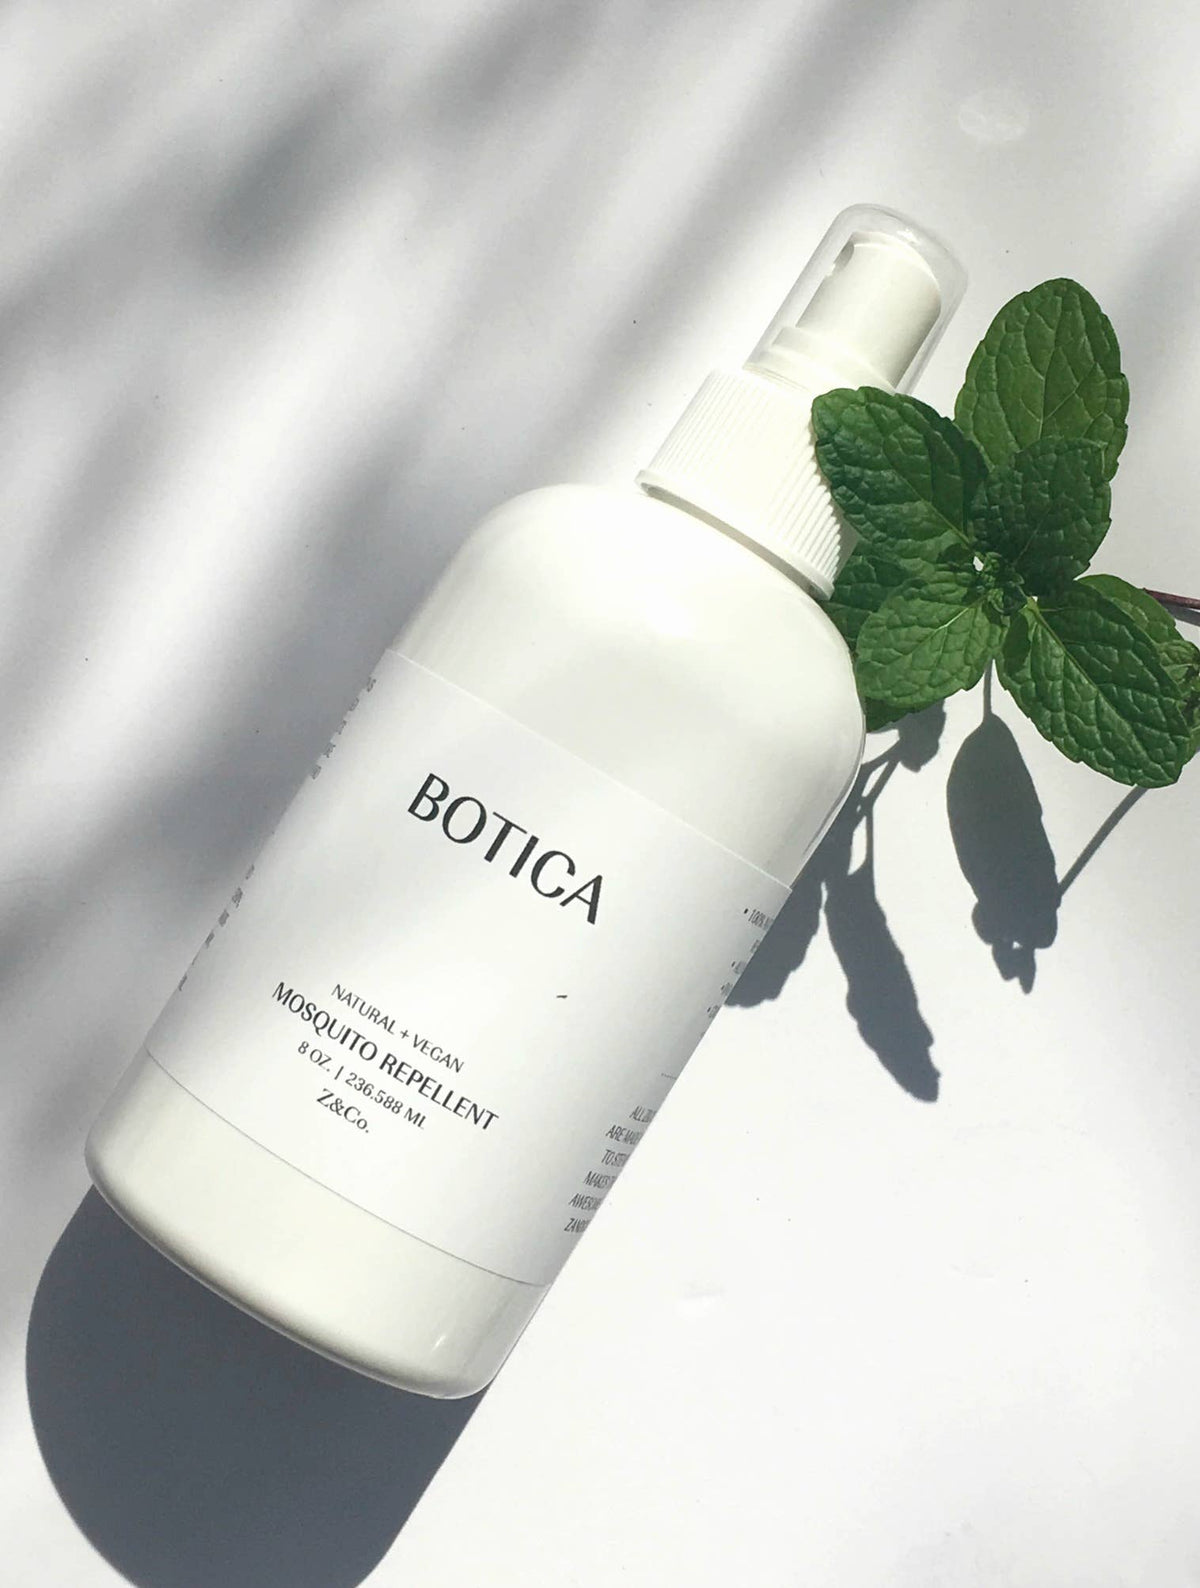 A white bottle of Z&Co. Mosquito Repellent Botica Collection DEET-free spray with mint leaves on its side, casting a shadow on a white surface in bright sunlight.